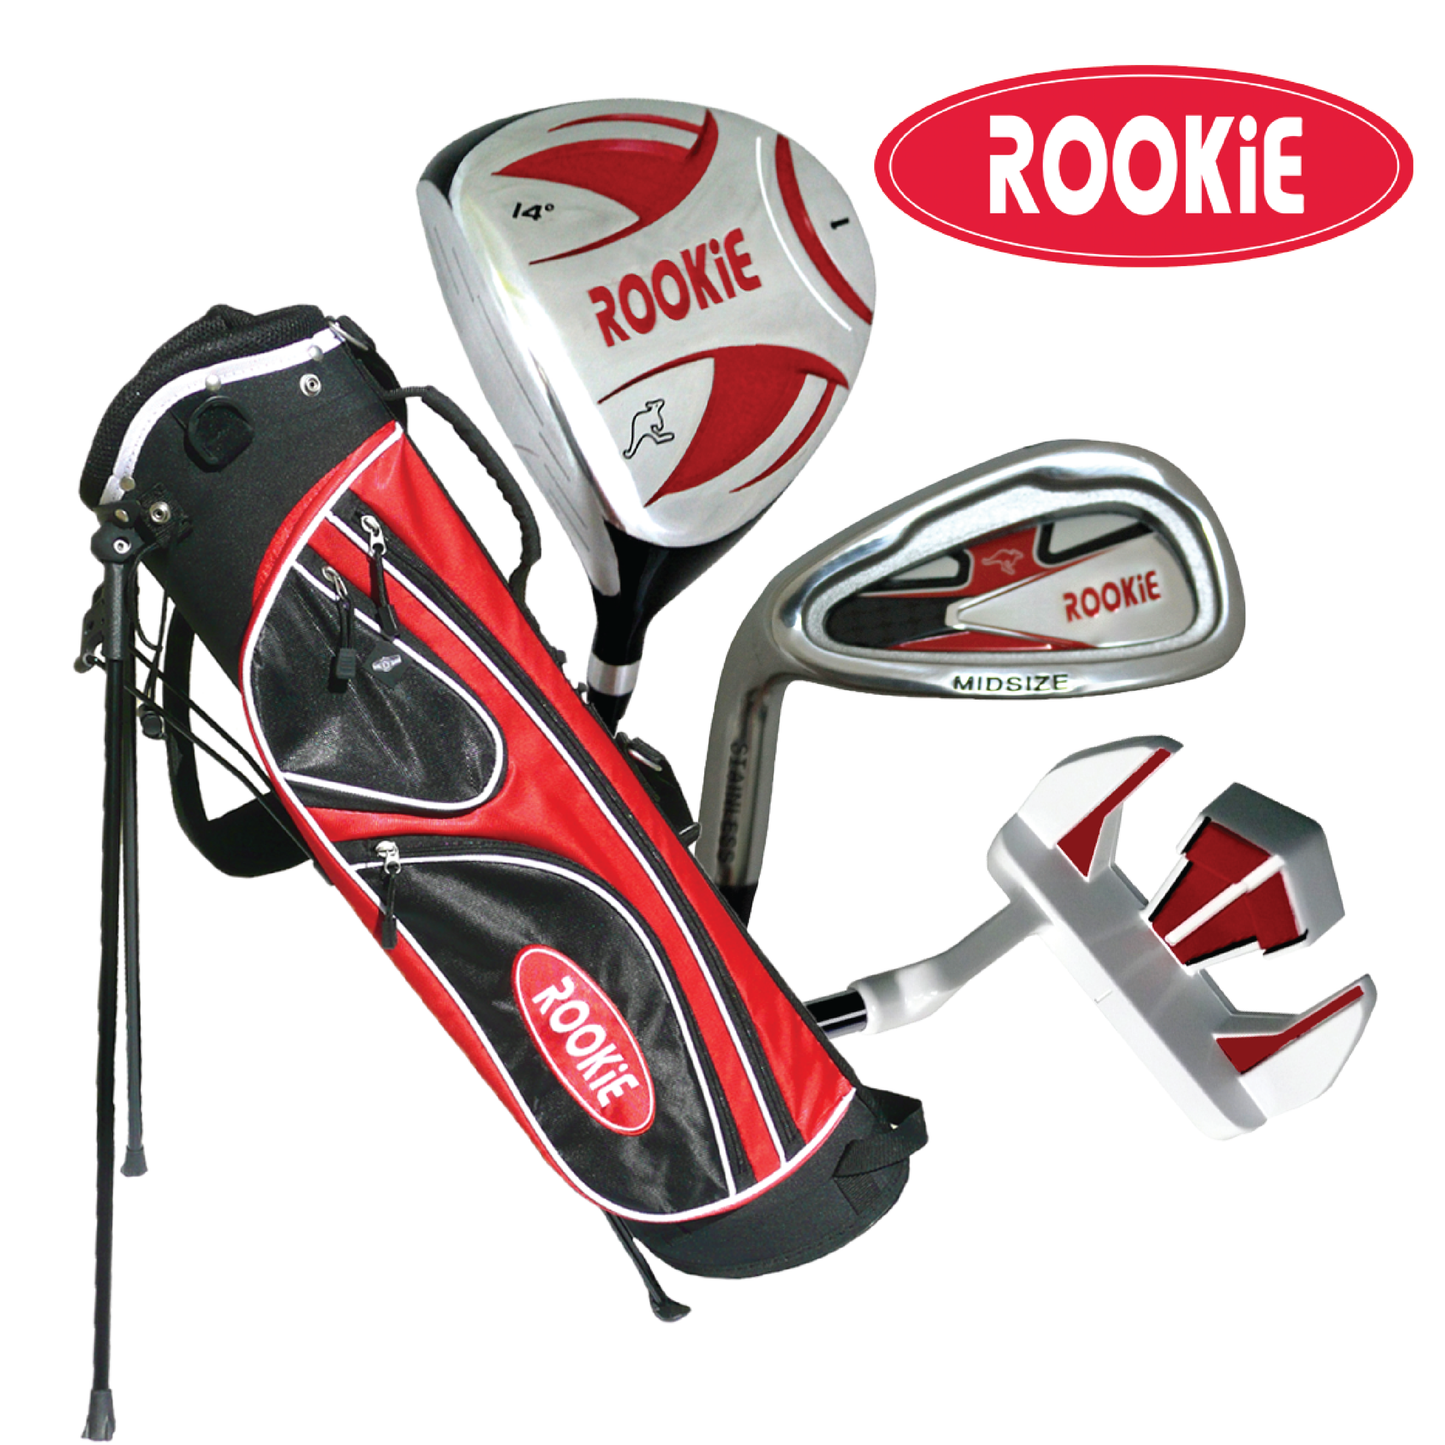 Rookie - Kids Golf Set LH - 4 Piece Red for 10 Yrs & Over